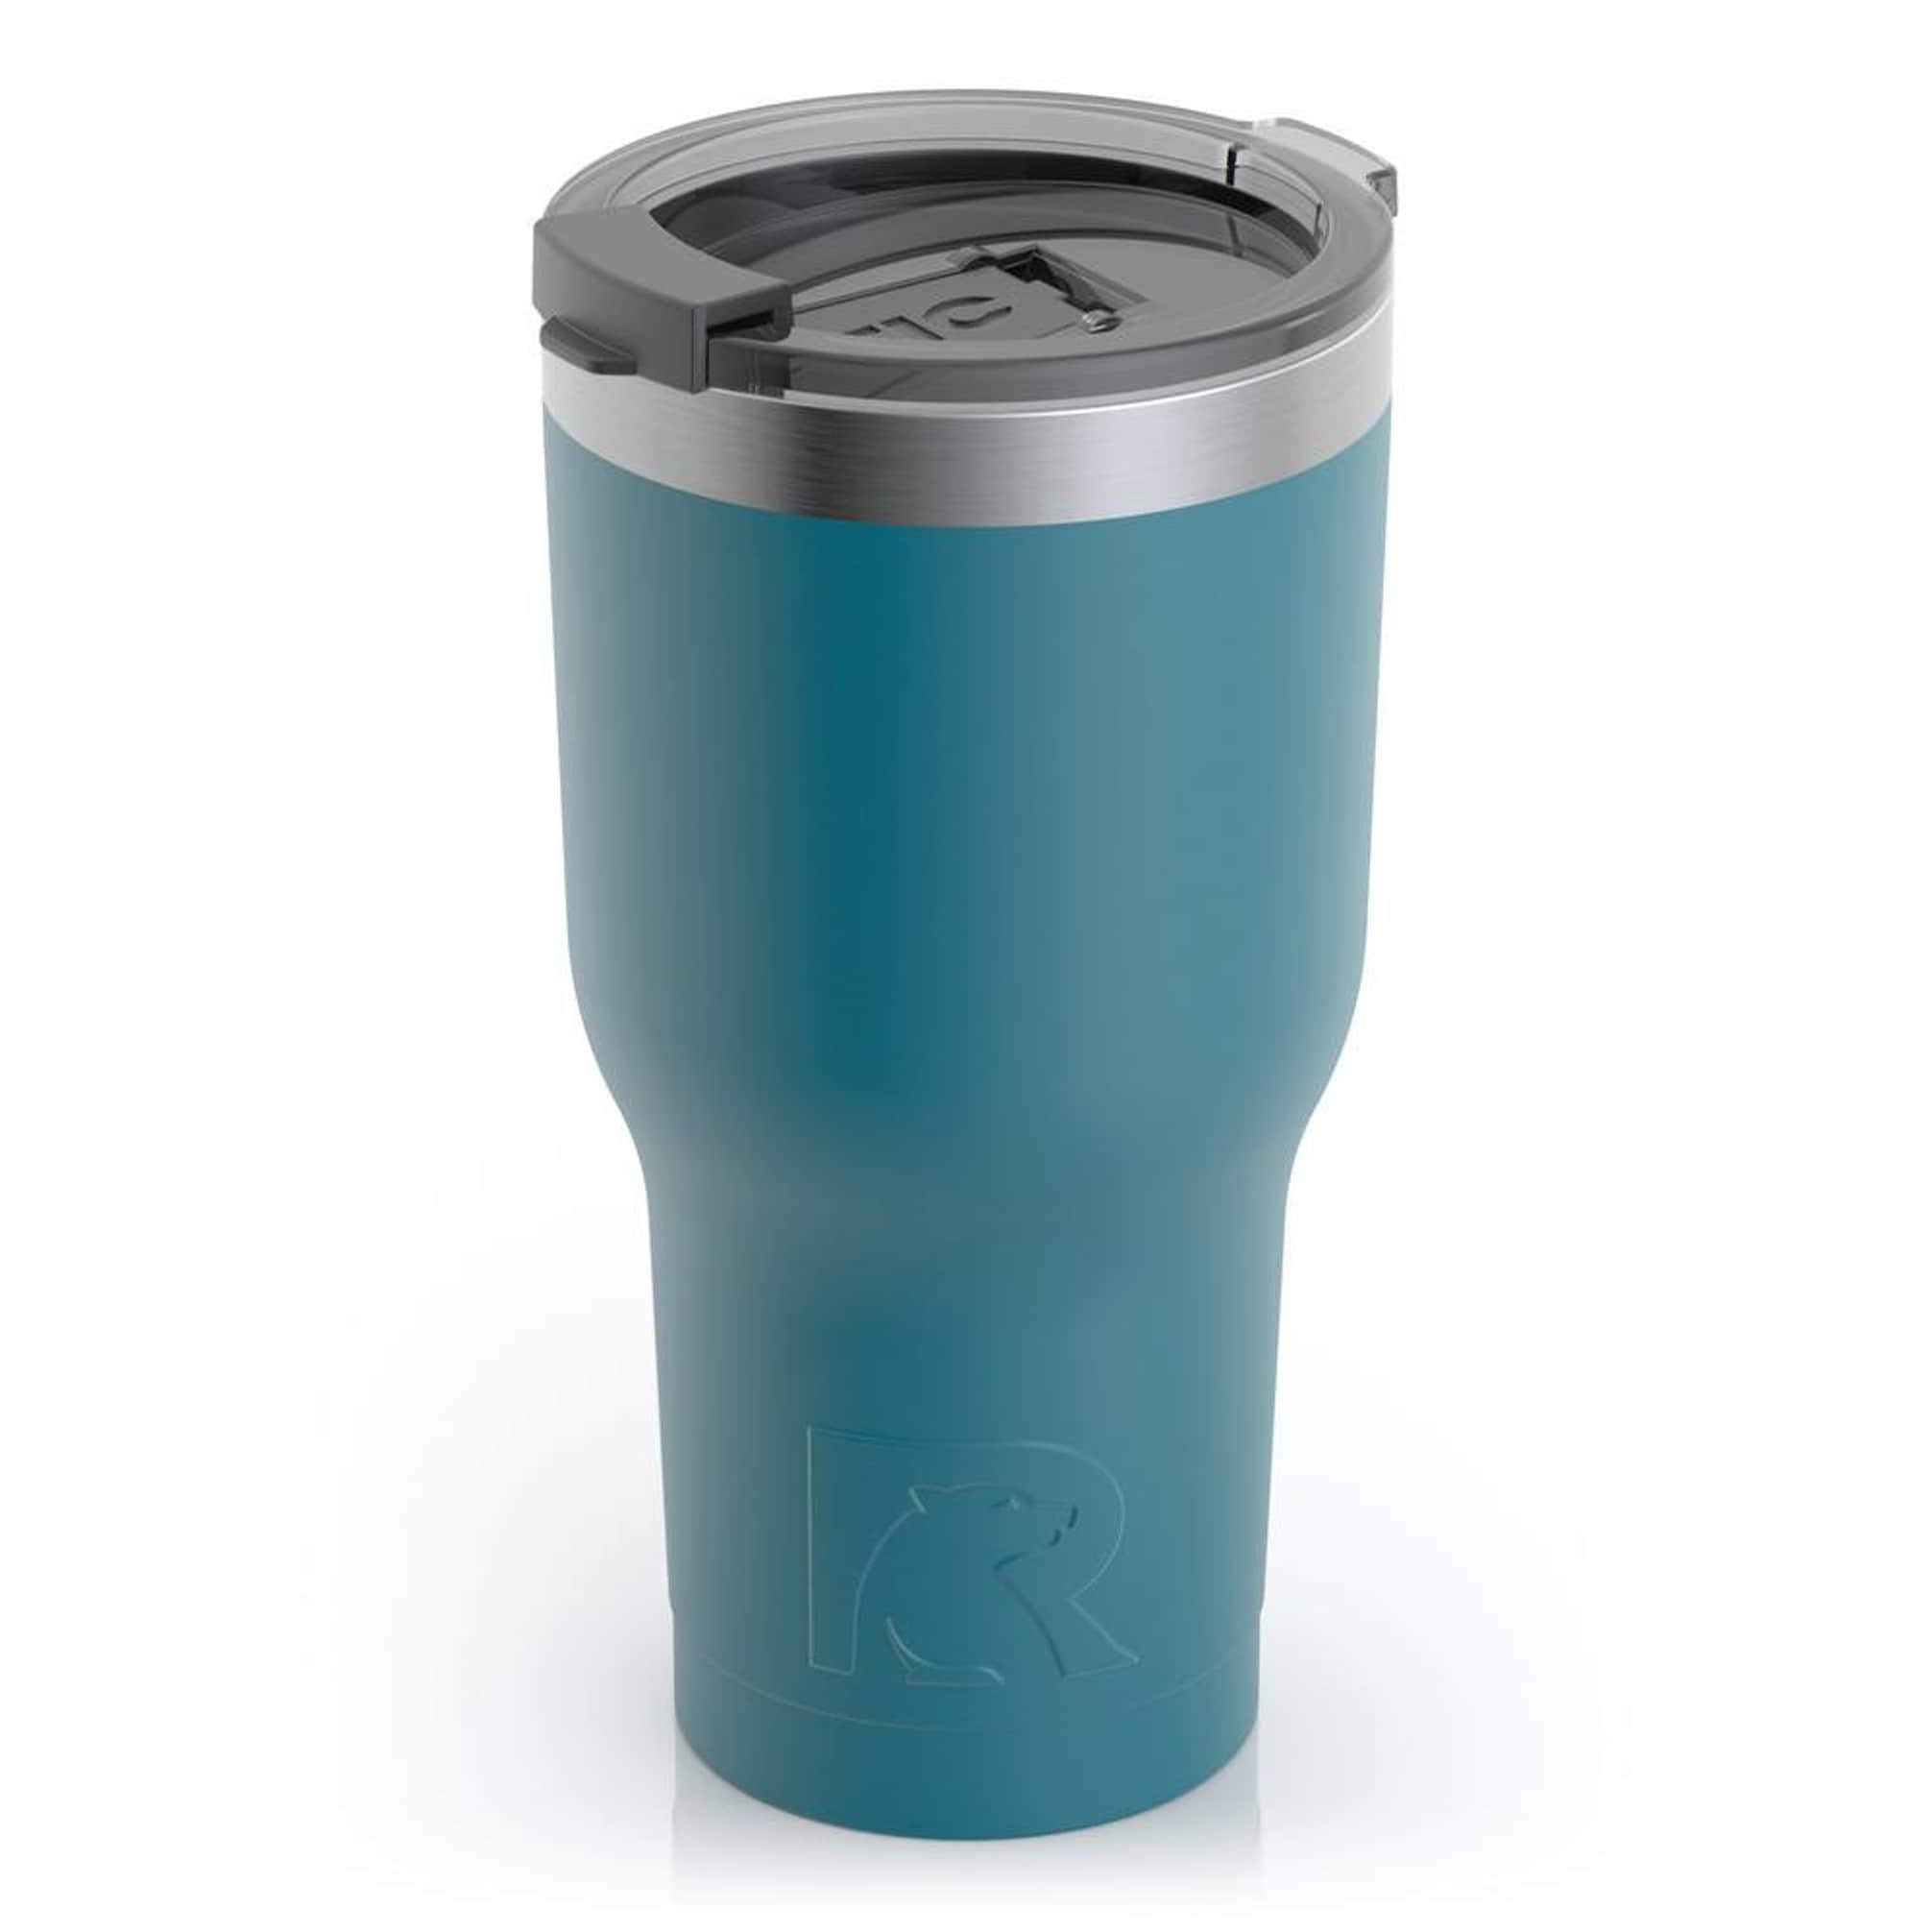 RTIC Double Wall Vacuum Insulated Tumbler, 40 oz, Teal 